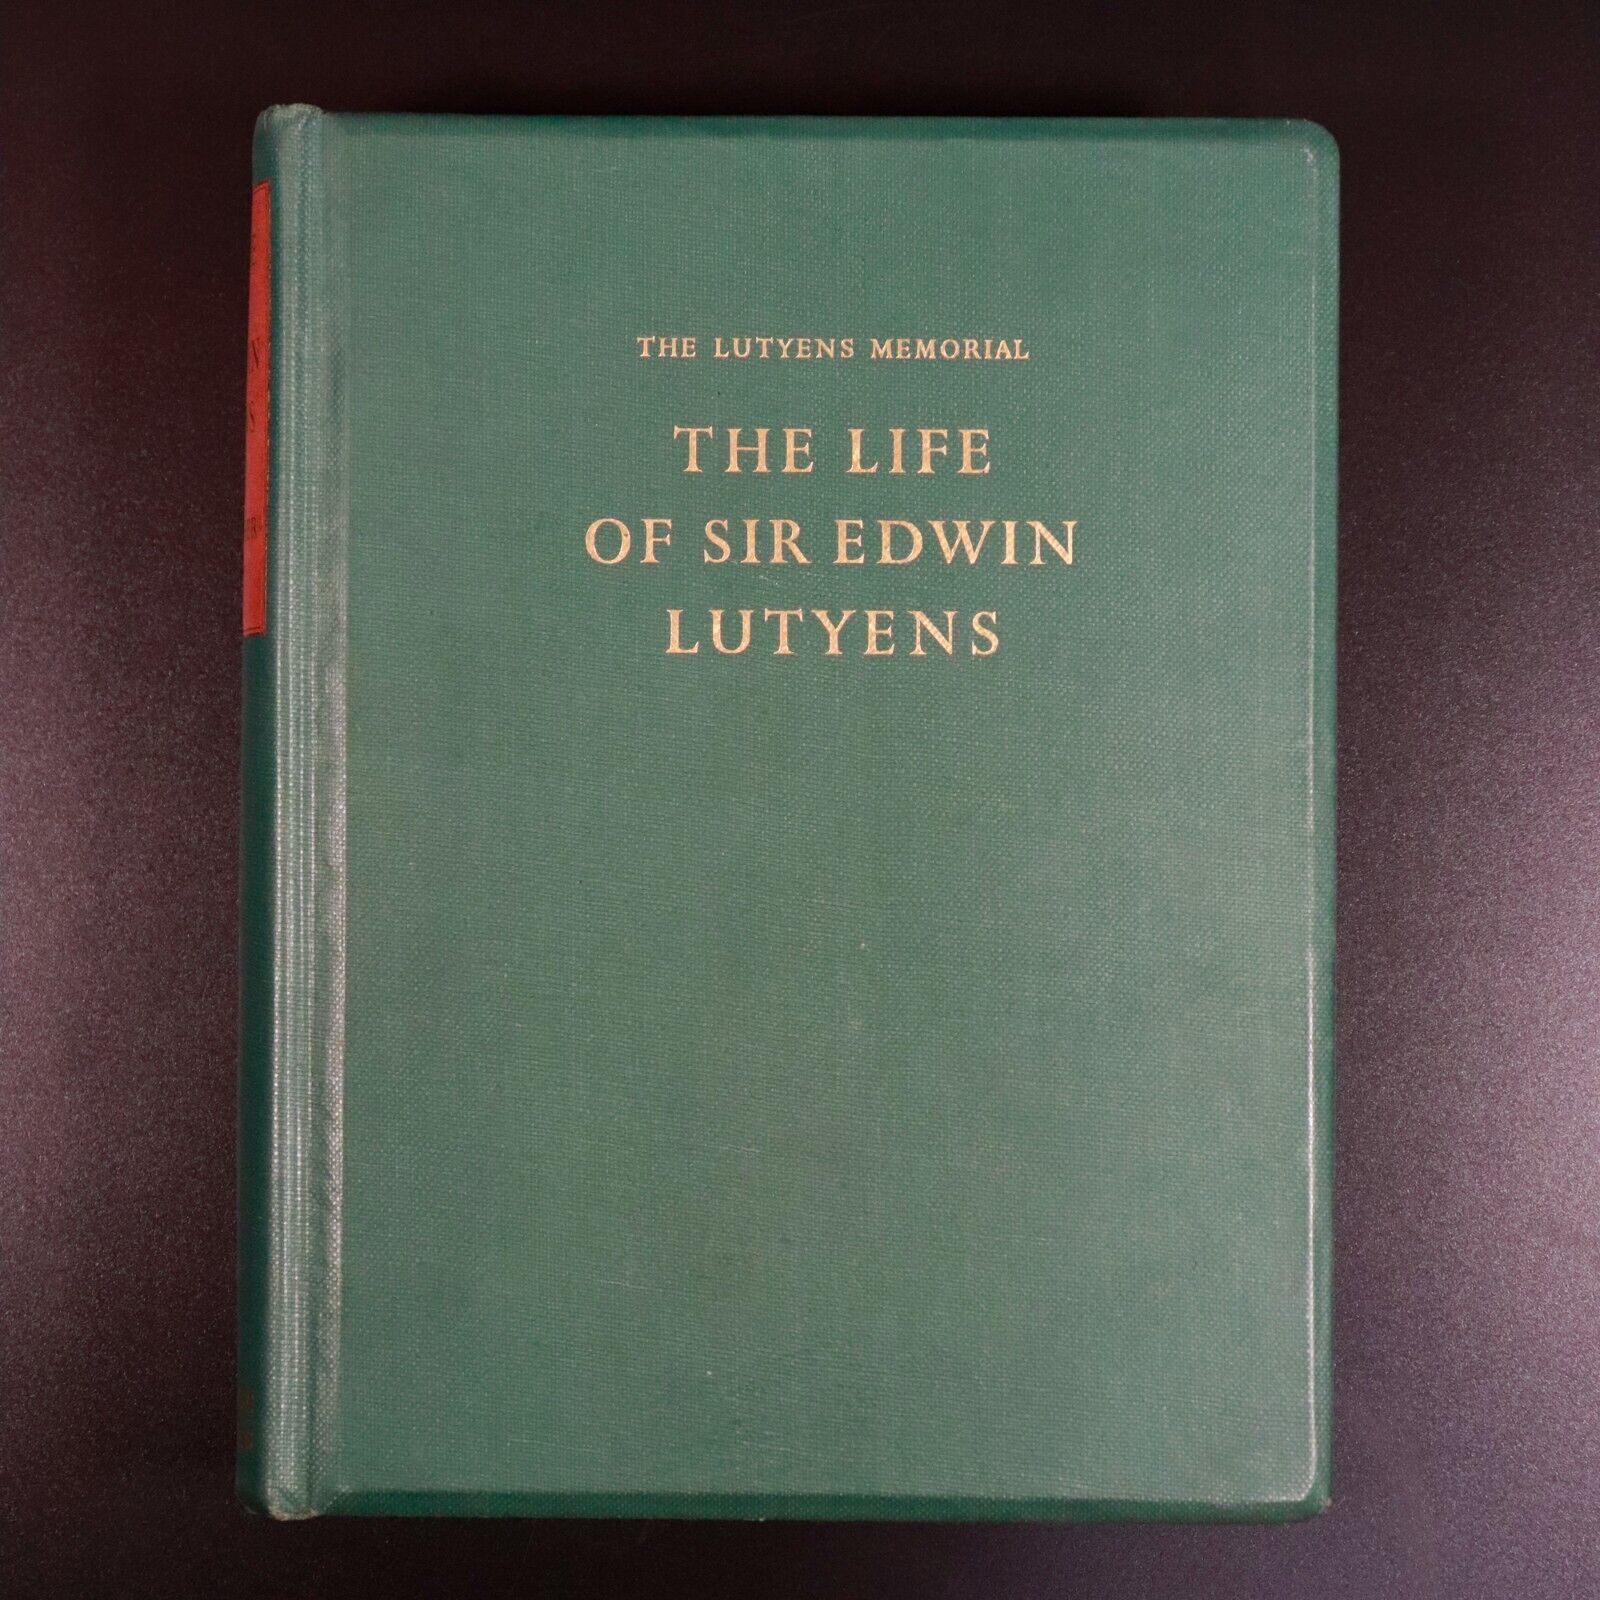 1950 The Life Of Sir Edwin Lutyens by C. Hussey Vintage Architecture Book